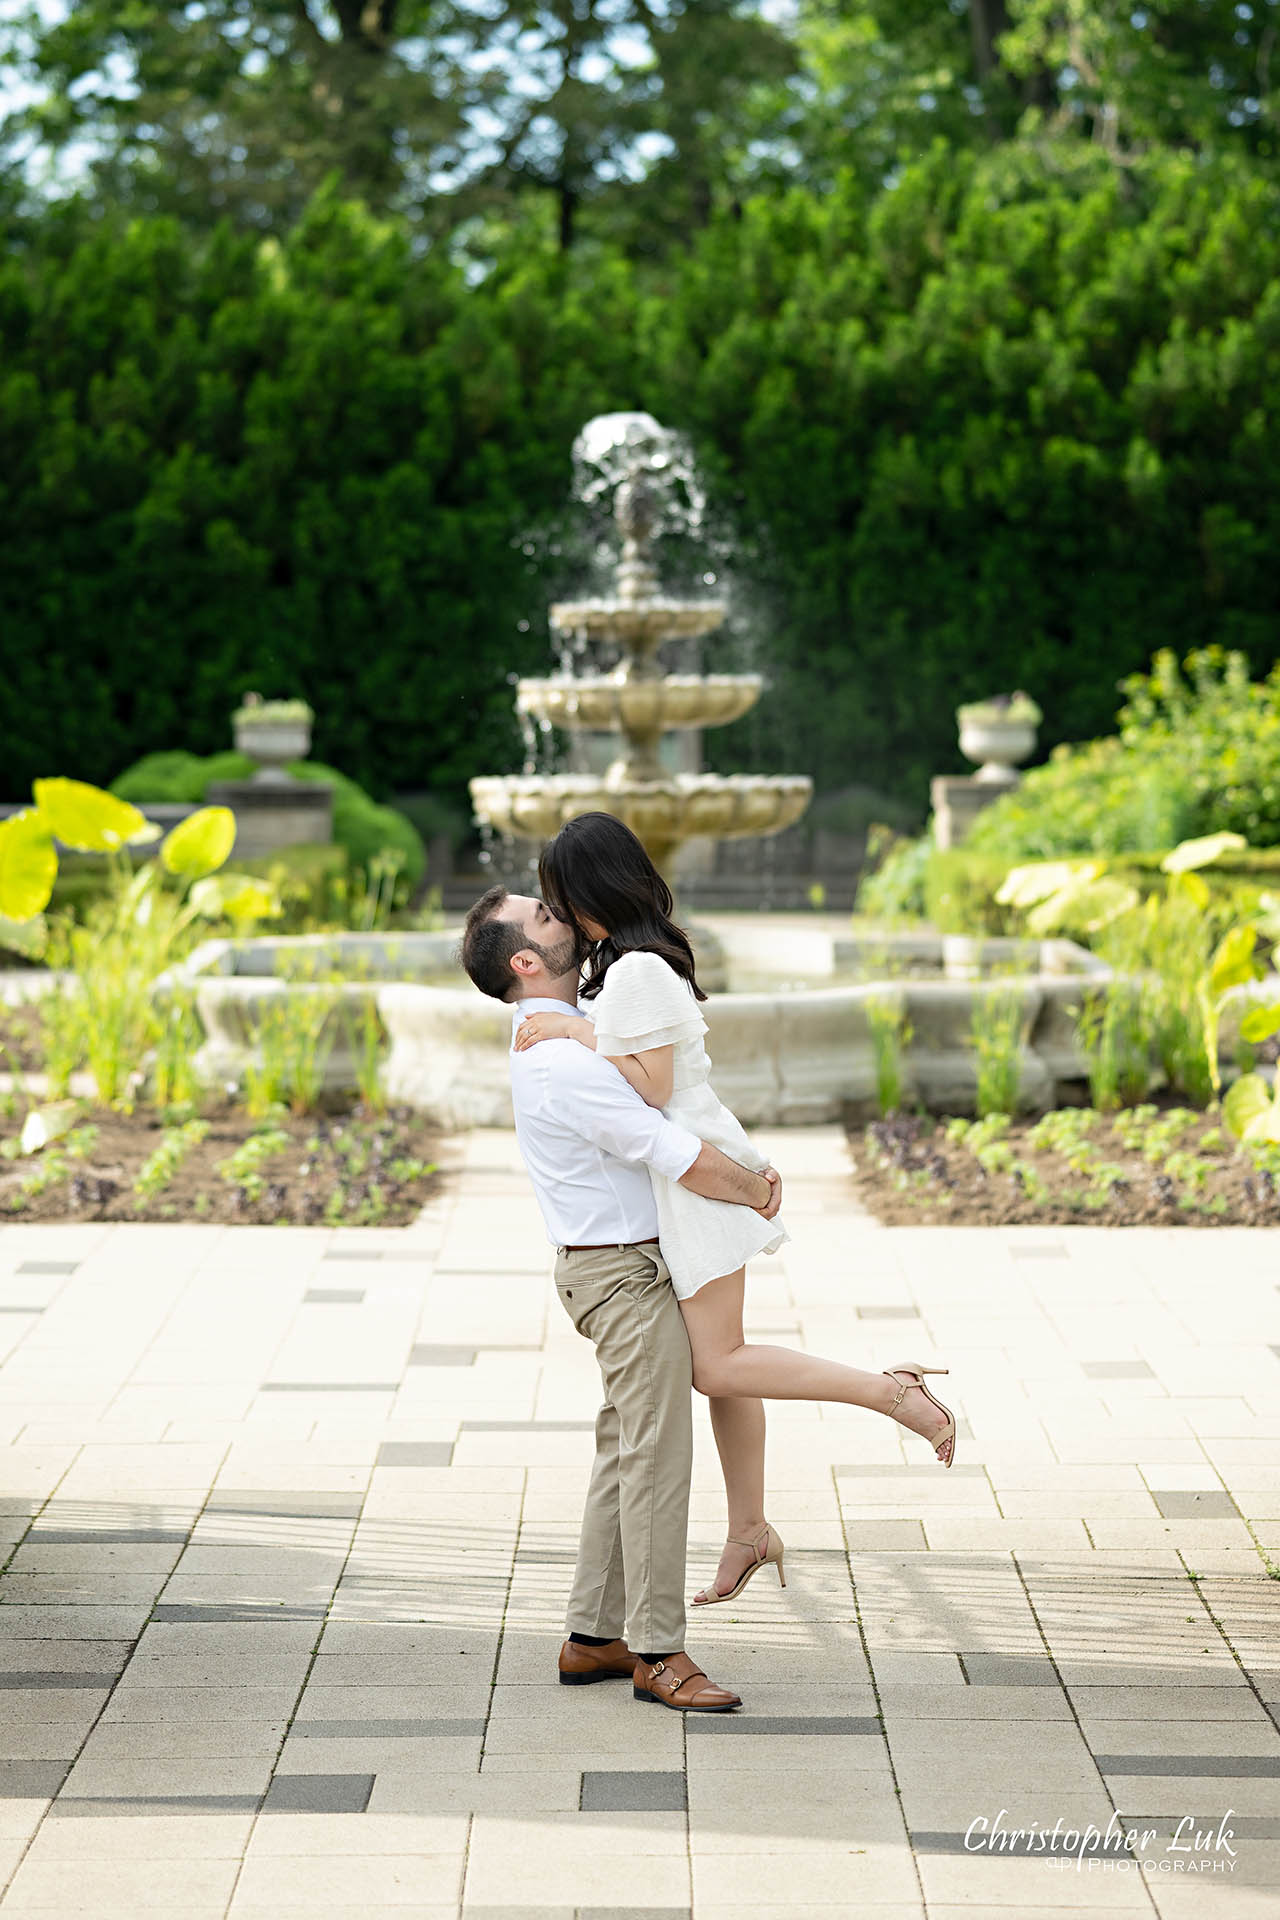 Bride with Groom Candid Natural Photojournalistic Organic Lift Hug Kiss Romantic Water Fountain